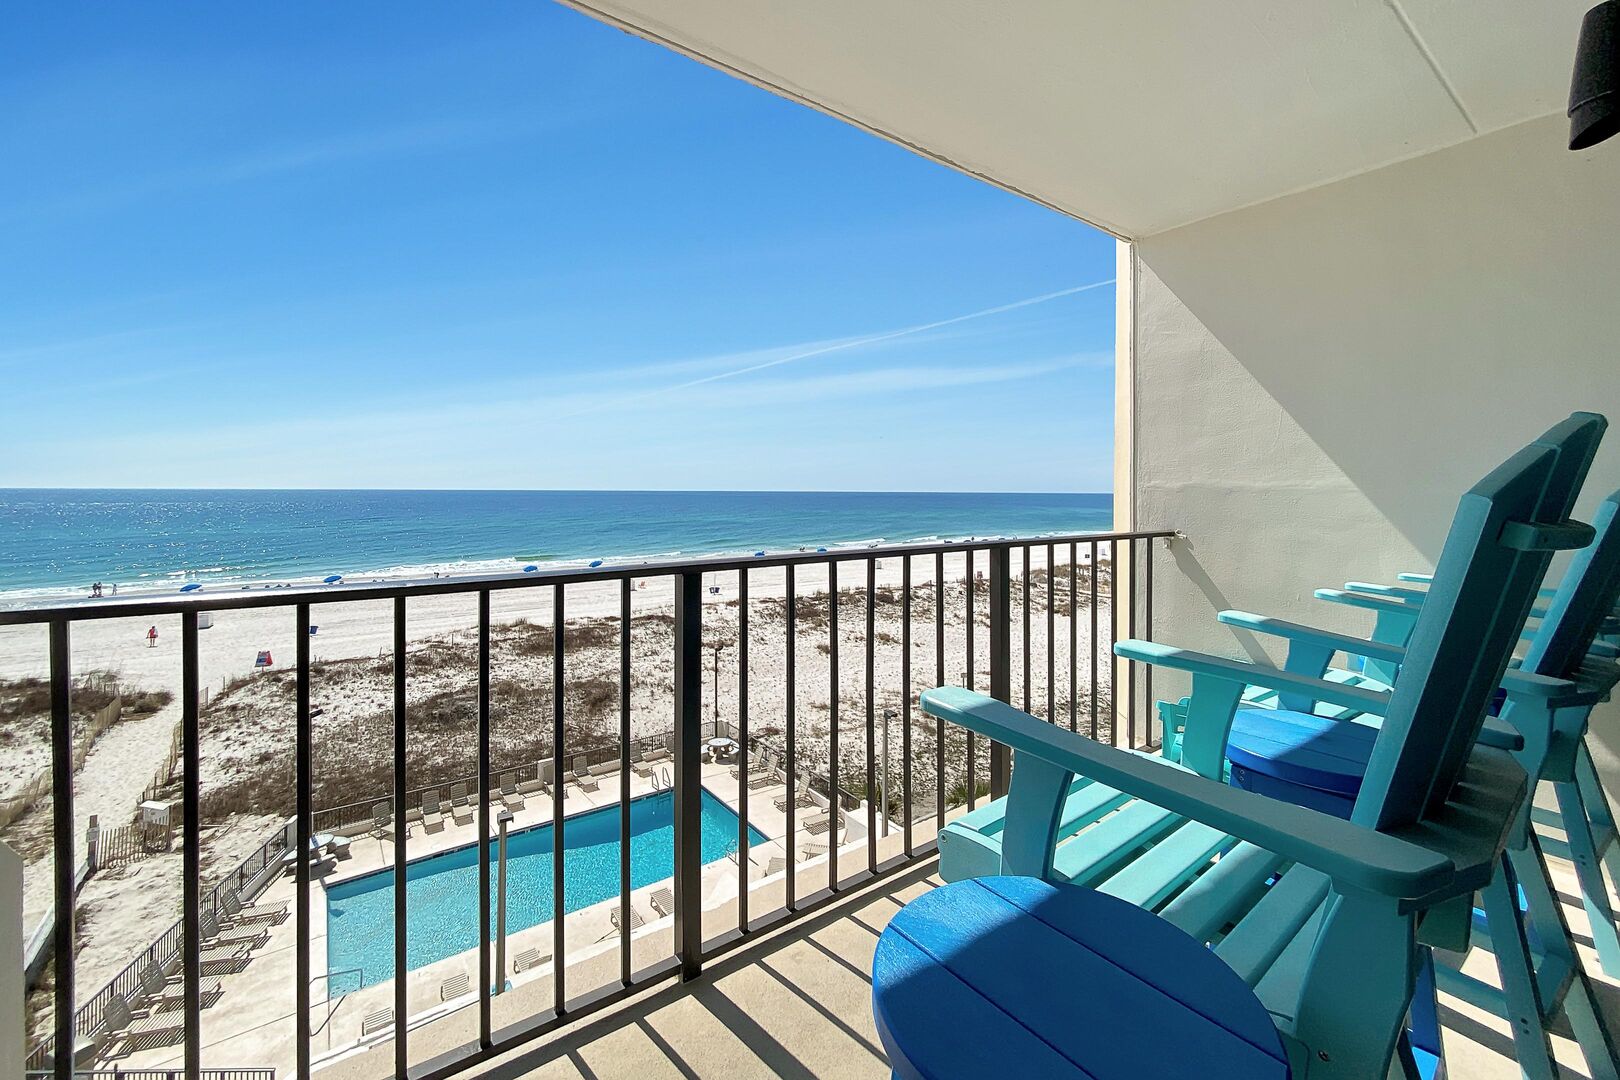 Private Balcony overlooking the Pool and the Gulf of Mexico